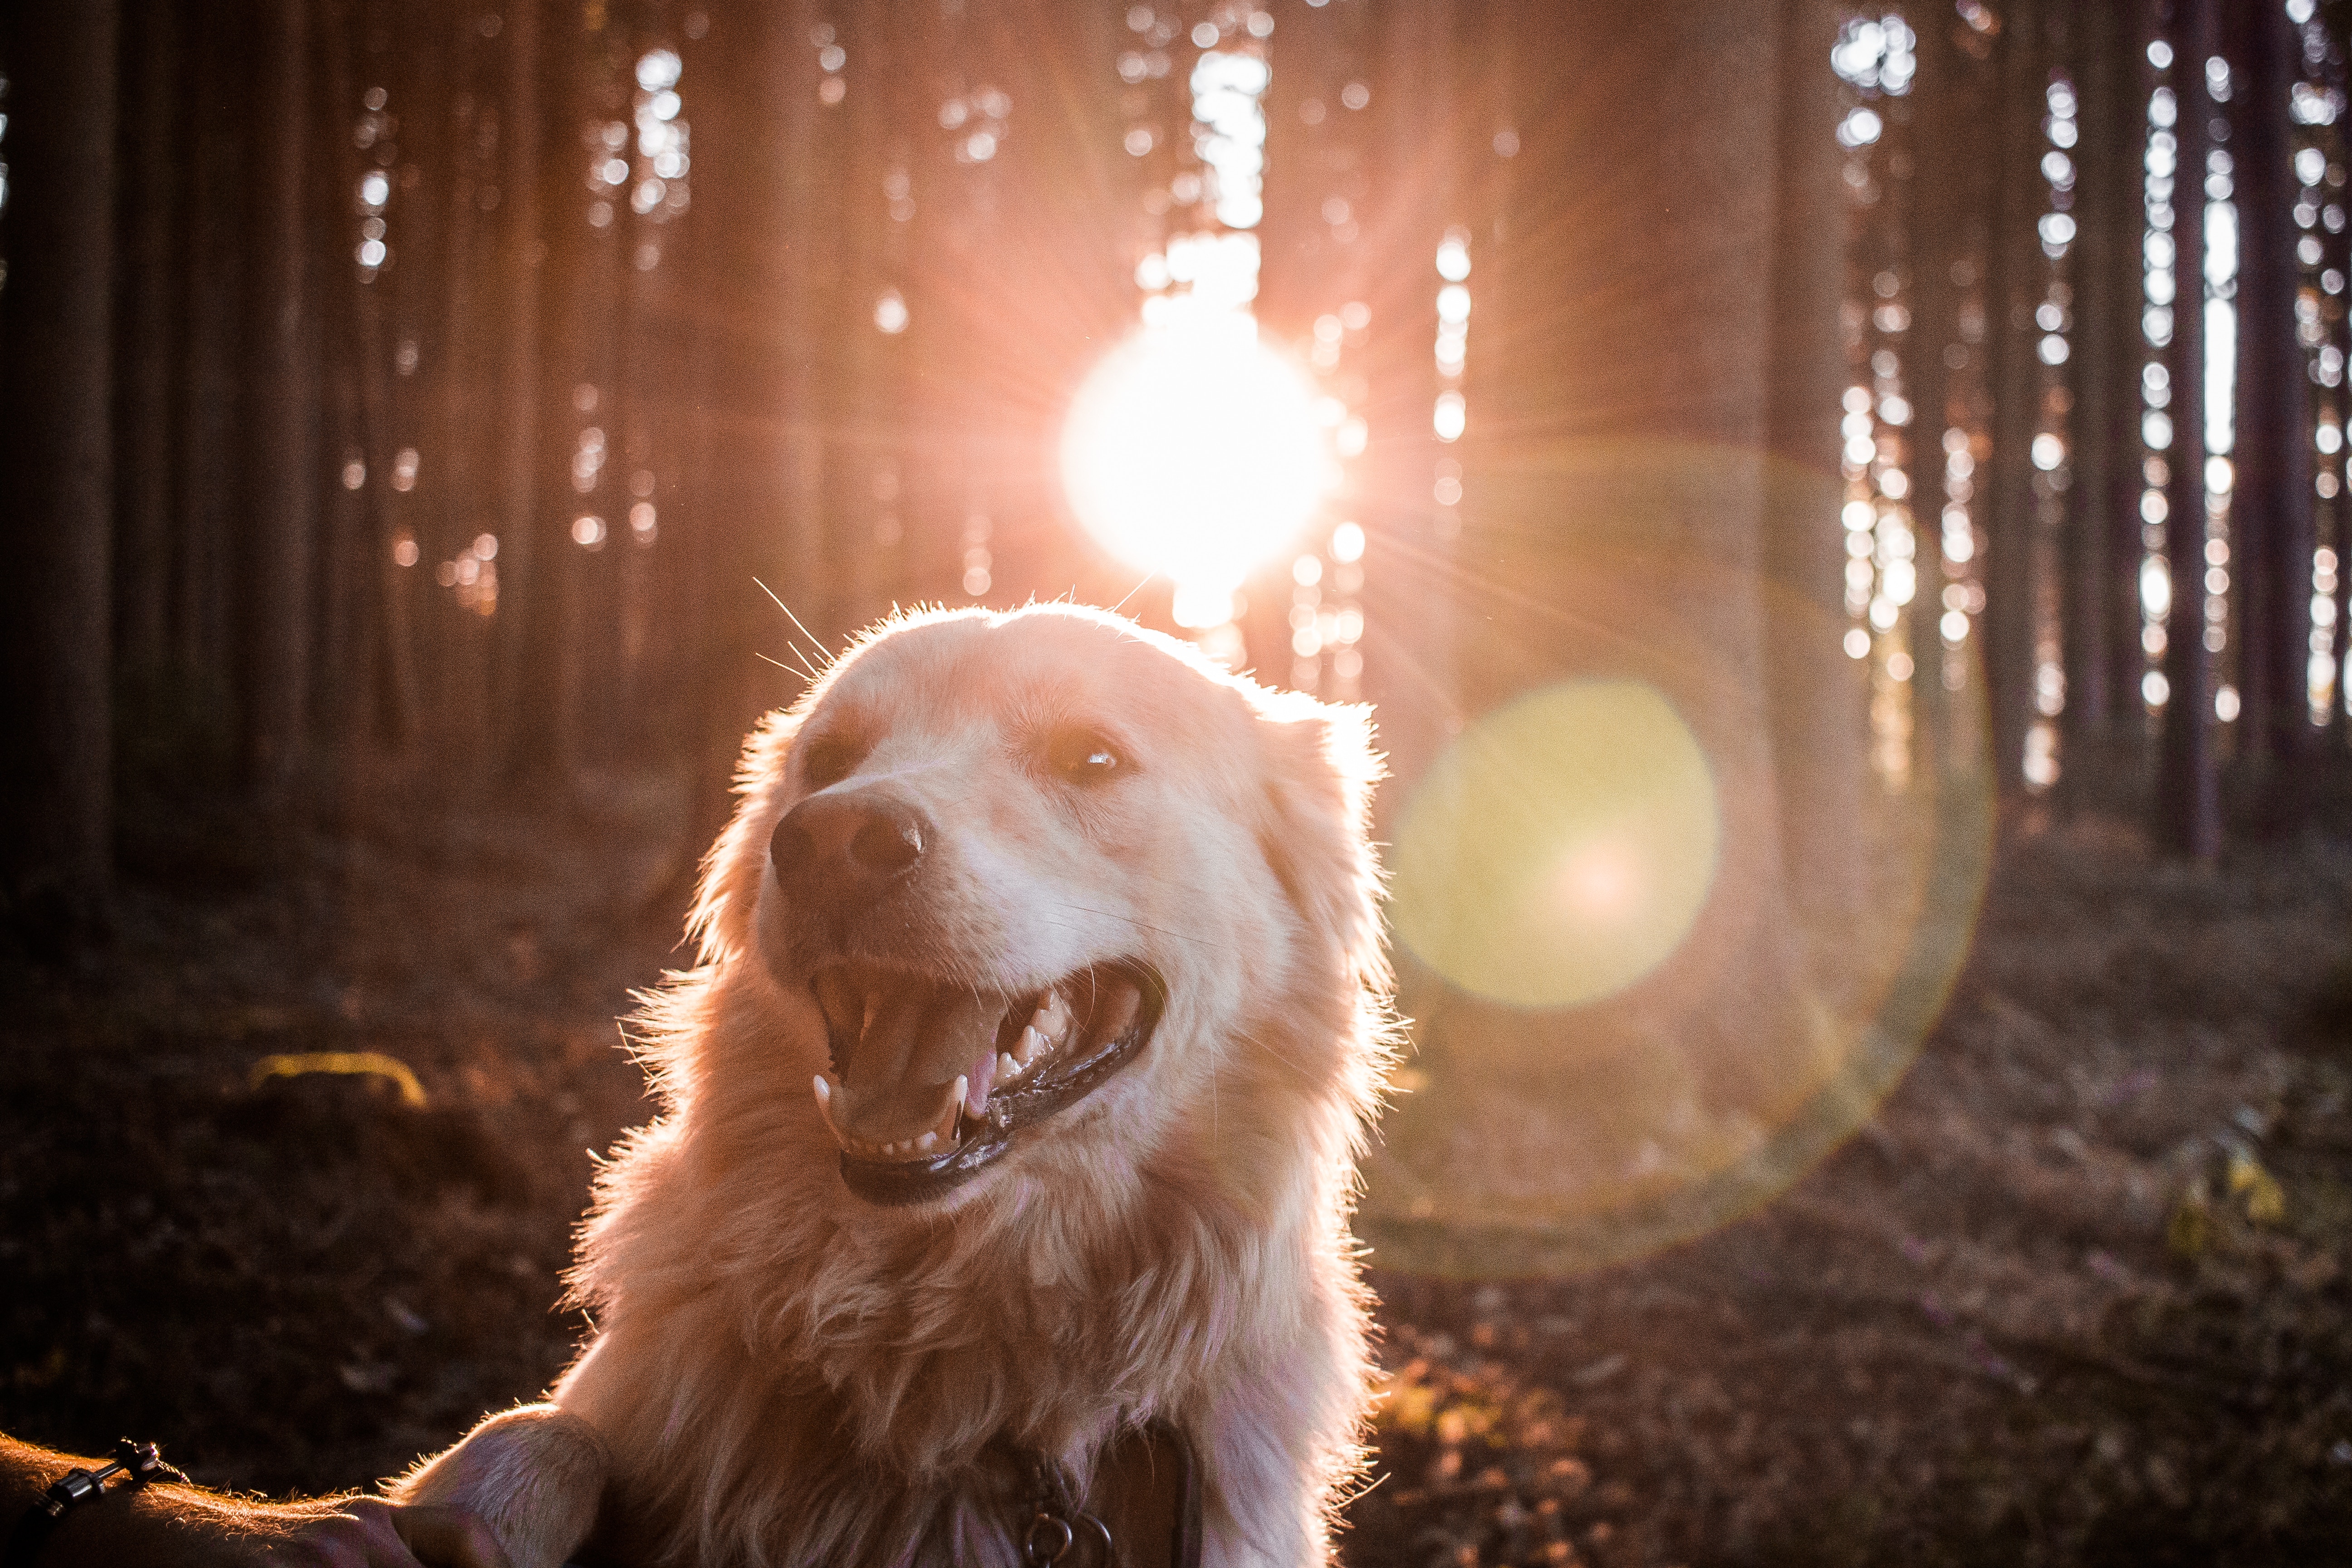 100256 download wallpaper animals, forest, dog, sunlight, happy screensavers and pictures for free